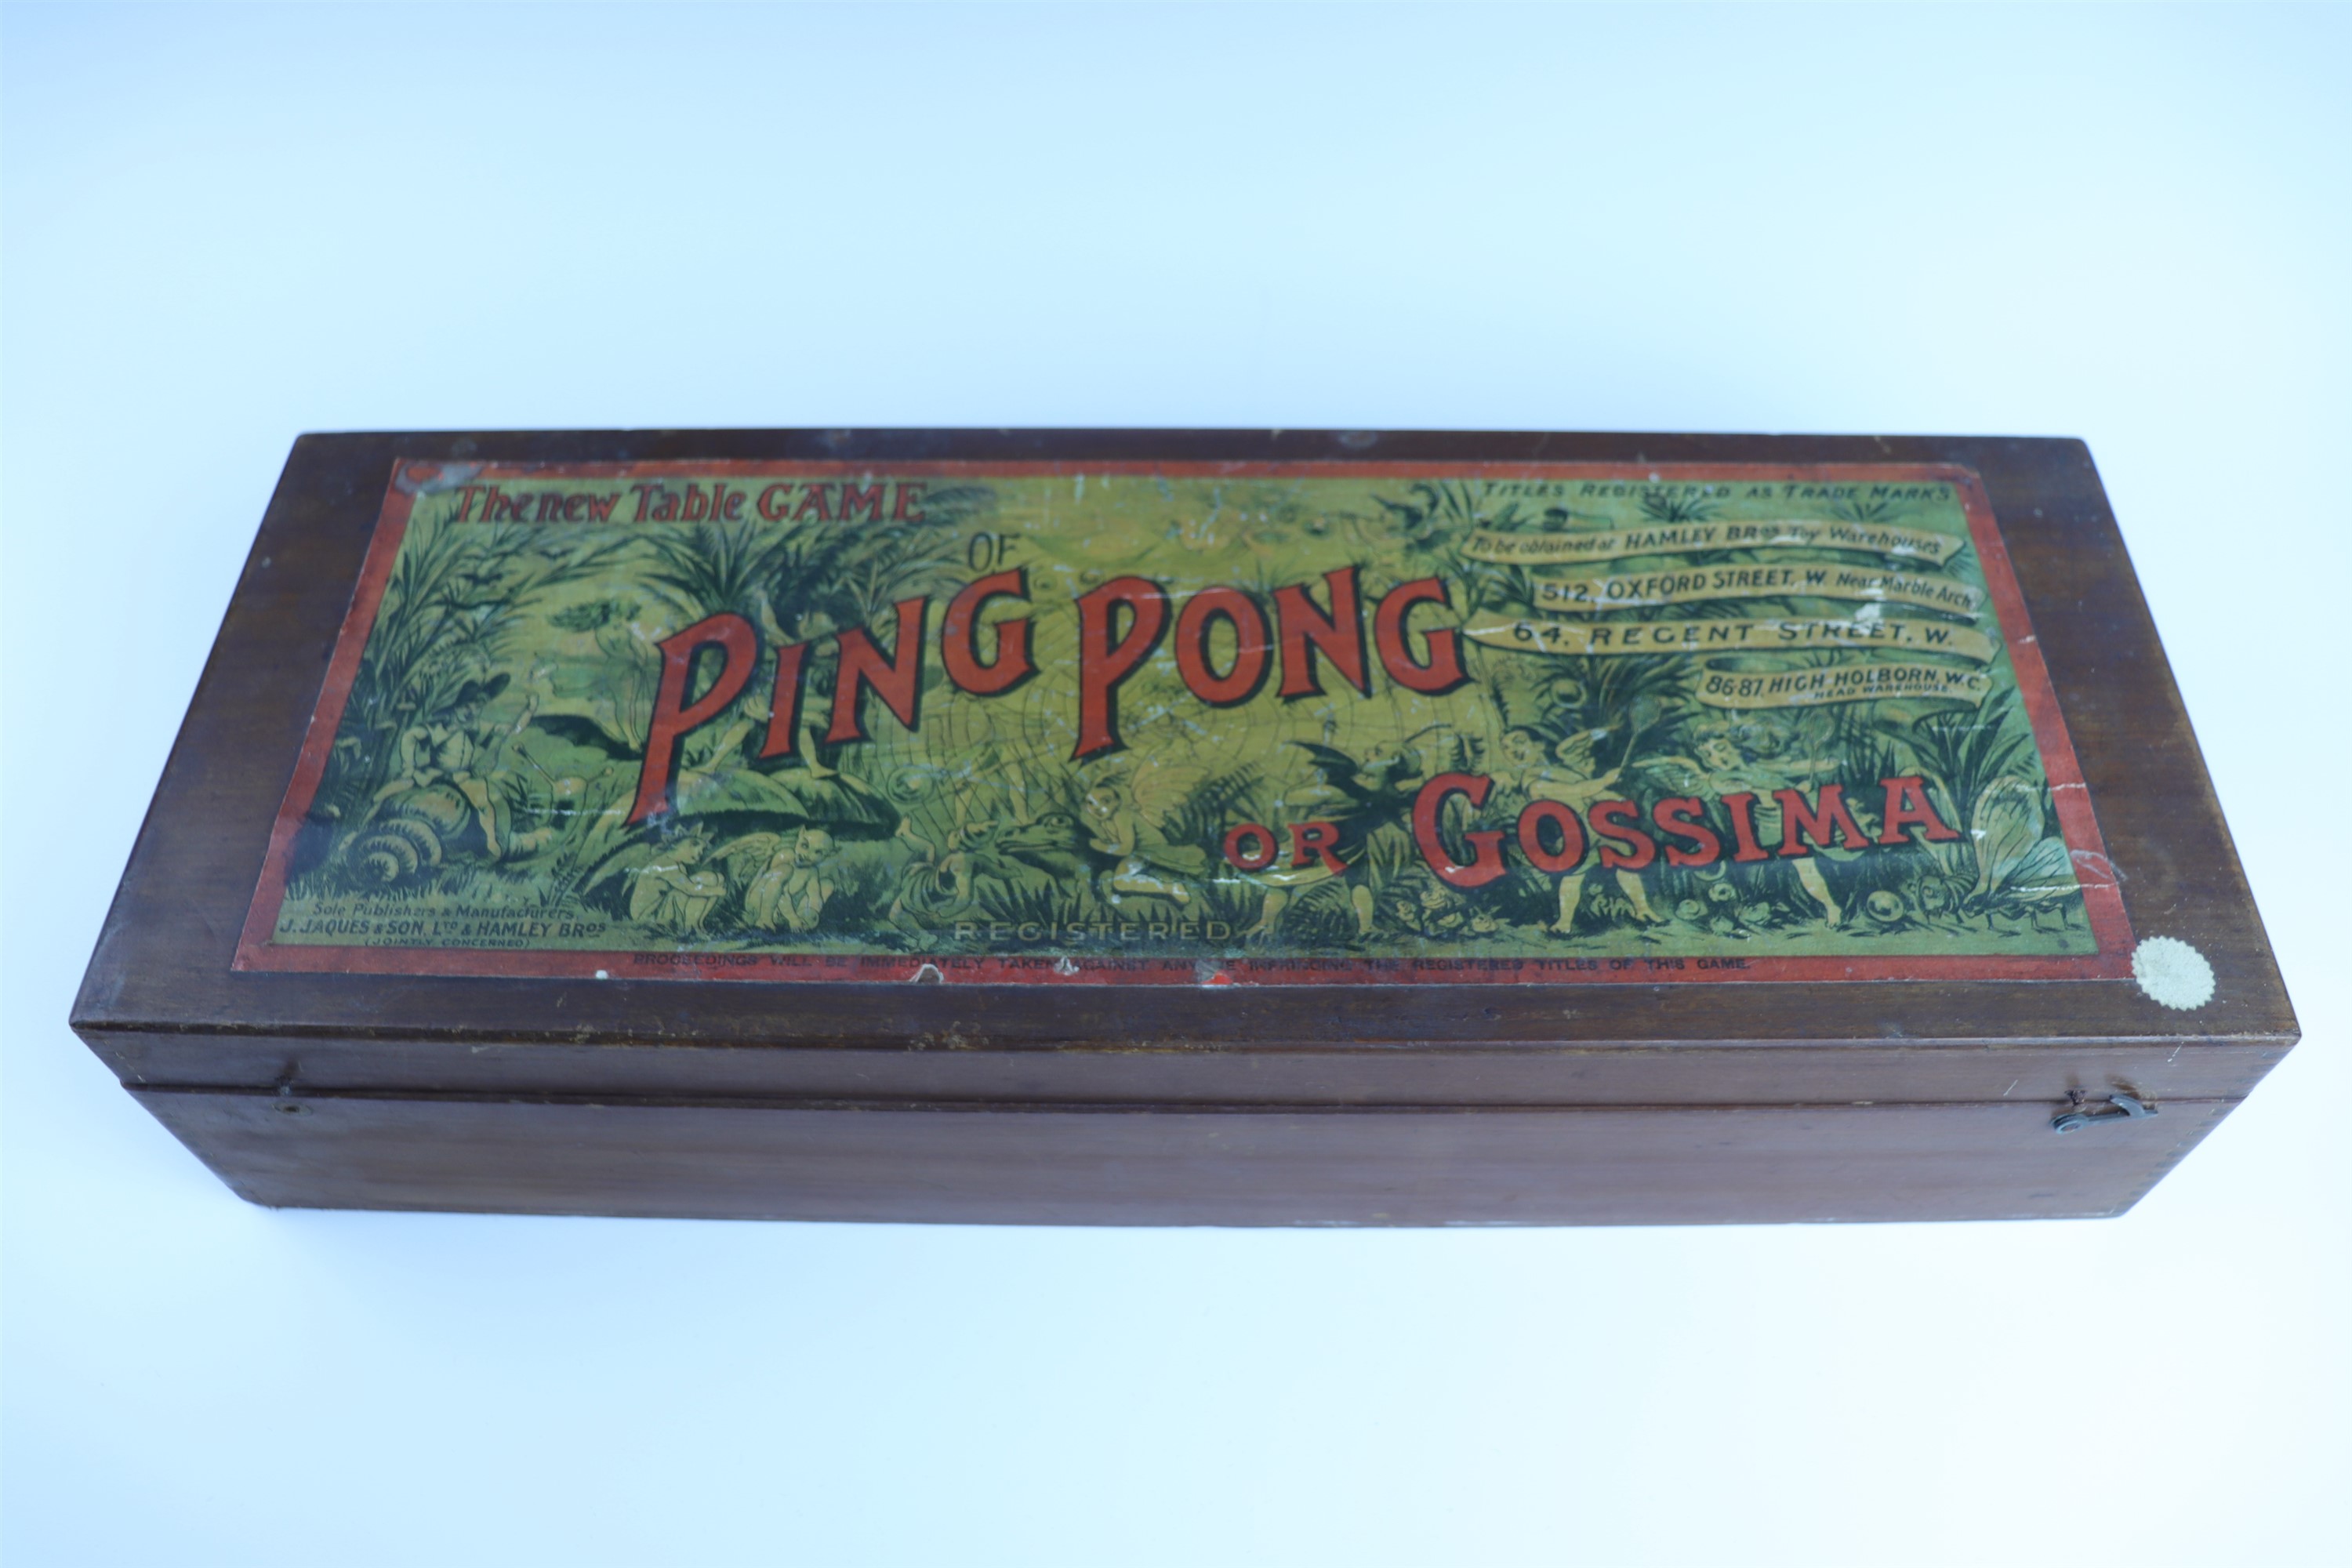 An early 20th Century J Jacques cased Ping Pong (or Gossing) table top parlour game, in